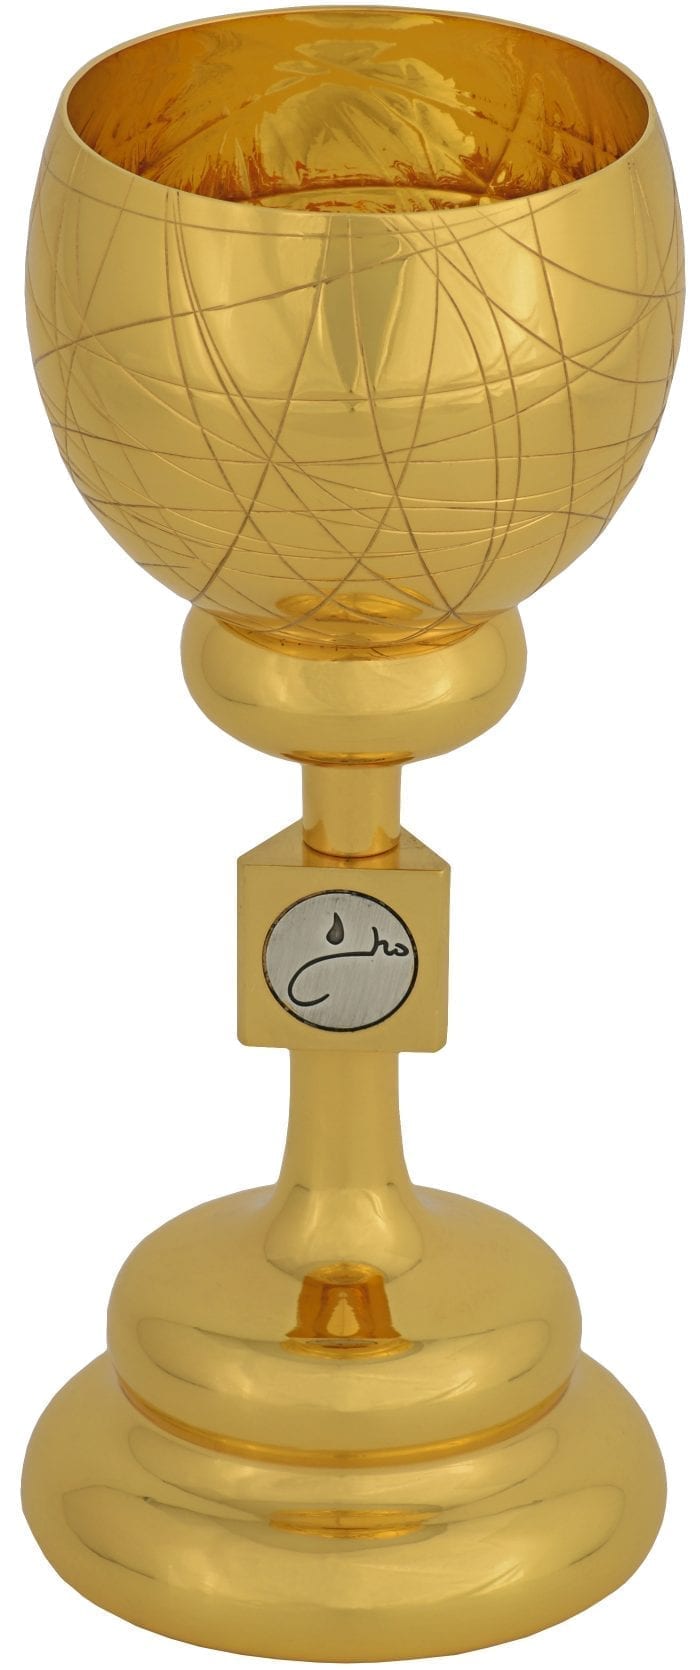 Calice "Flagellation" Maranatha Lab neo baroque in gilded brass embellished with engravings on the cup and symbol Jhs